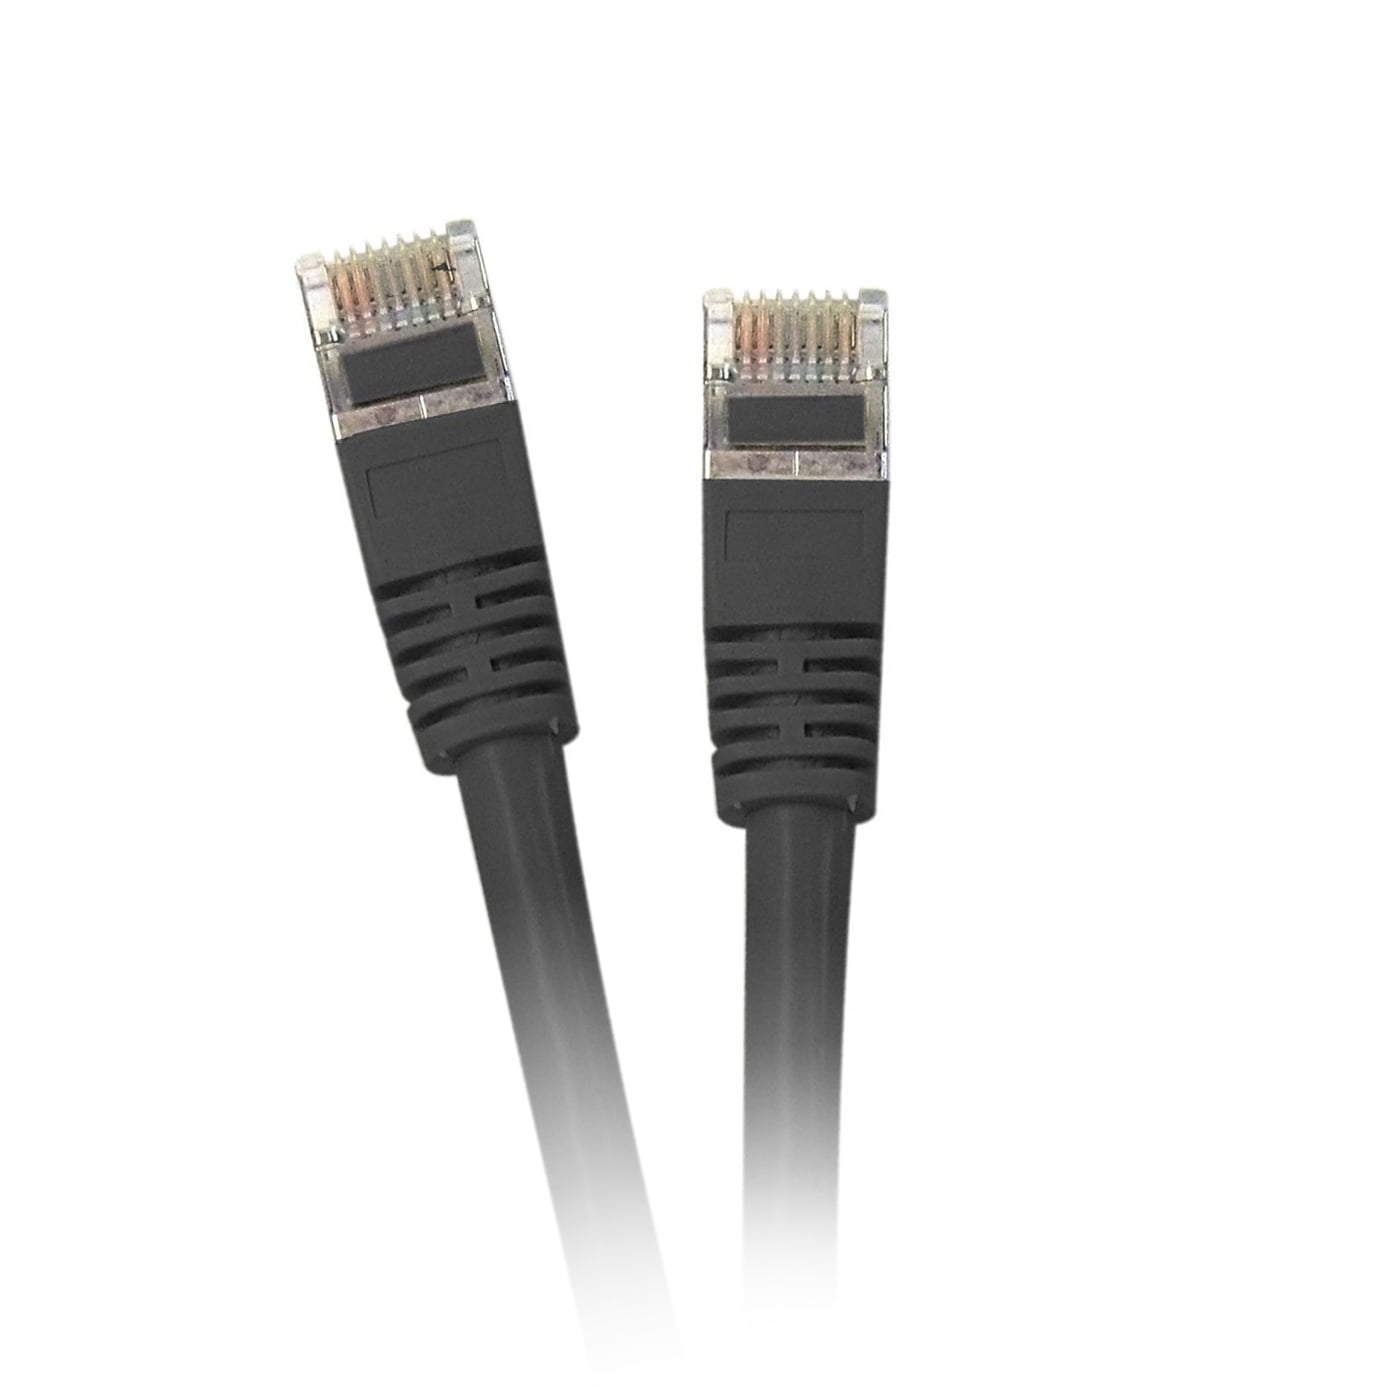 Snagless/Molded Boot ED895282 eDragon 10 Cat5e Black Ethernet Patch Cable Pack of 1 